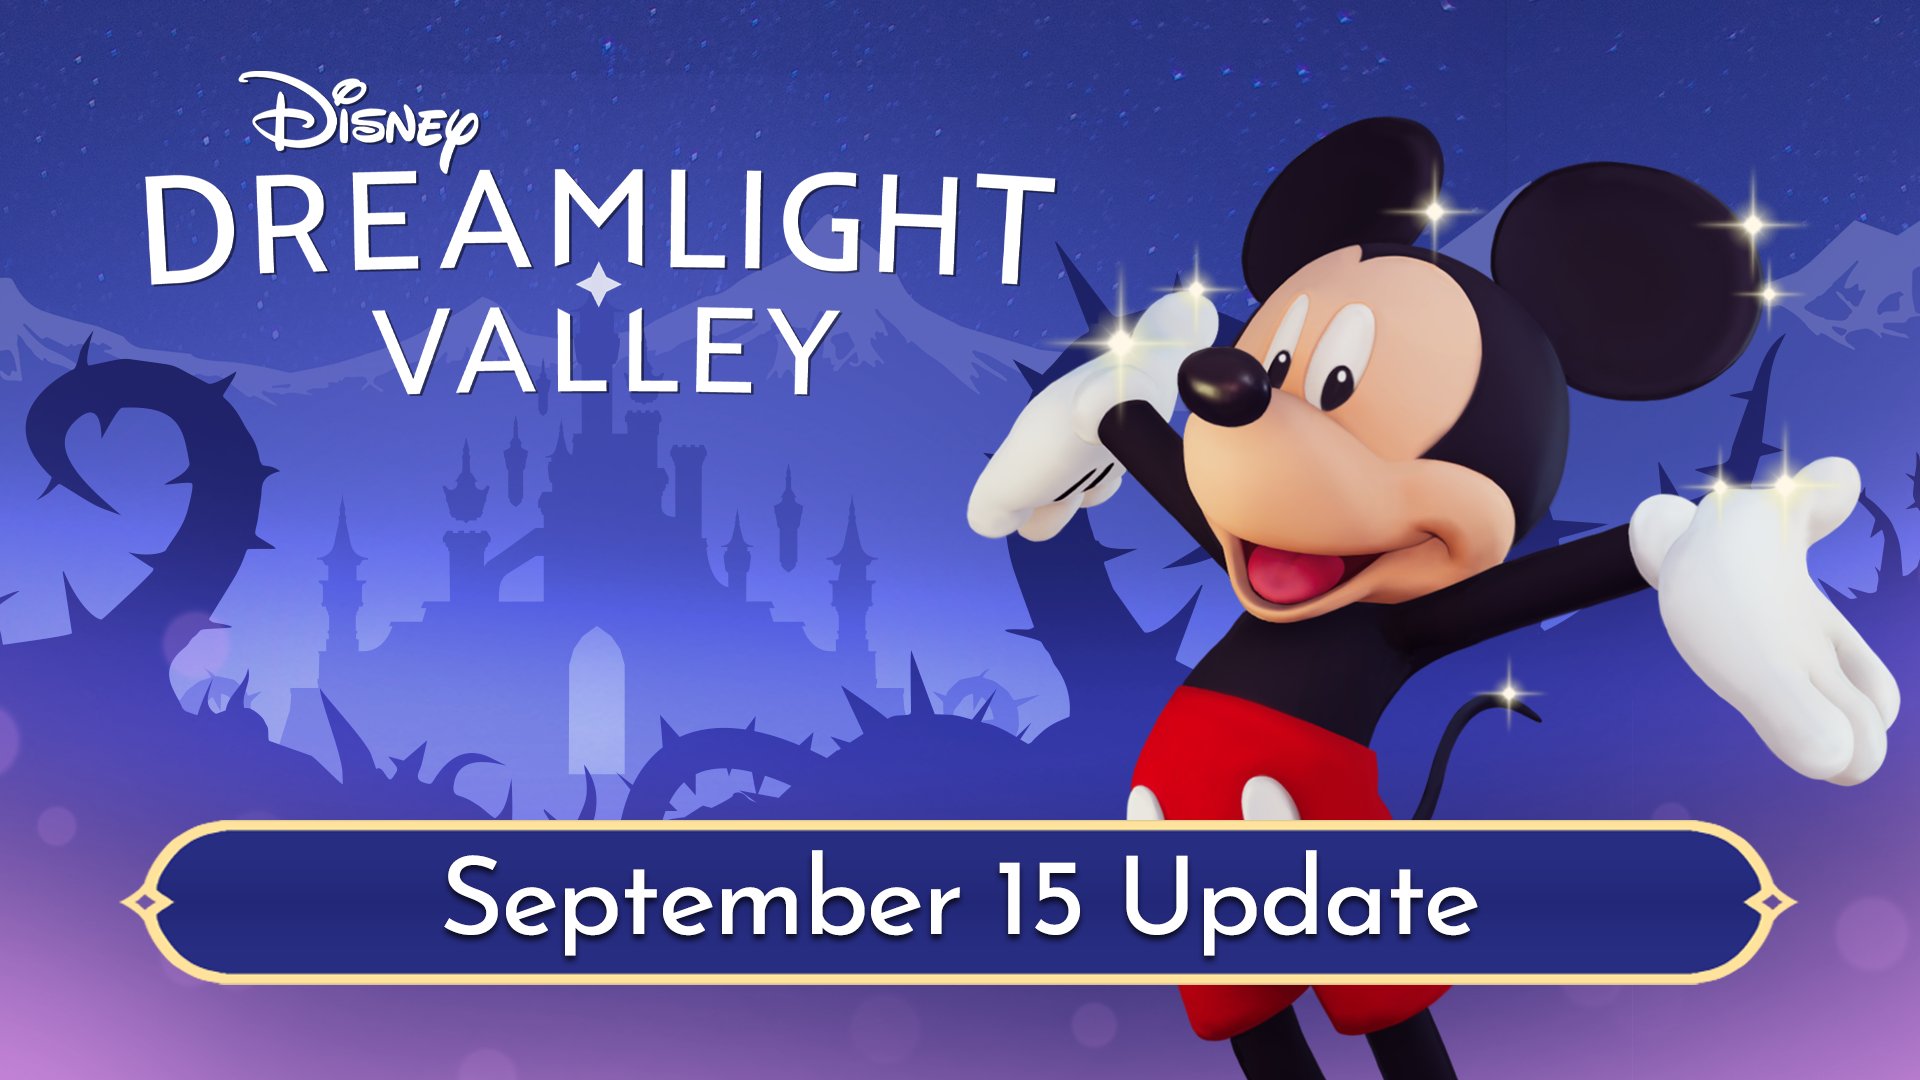 Disney Dreamlight Valley Version 1.0.5 patch now available Nintendo Wire